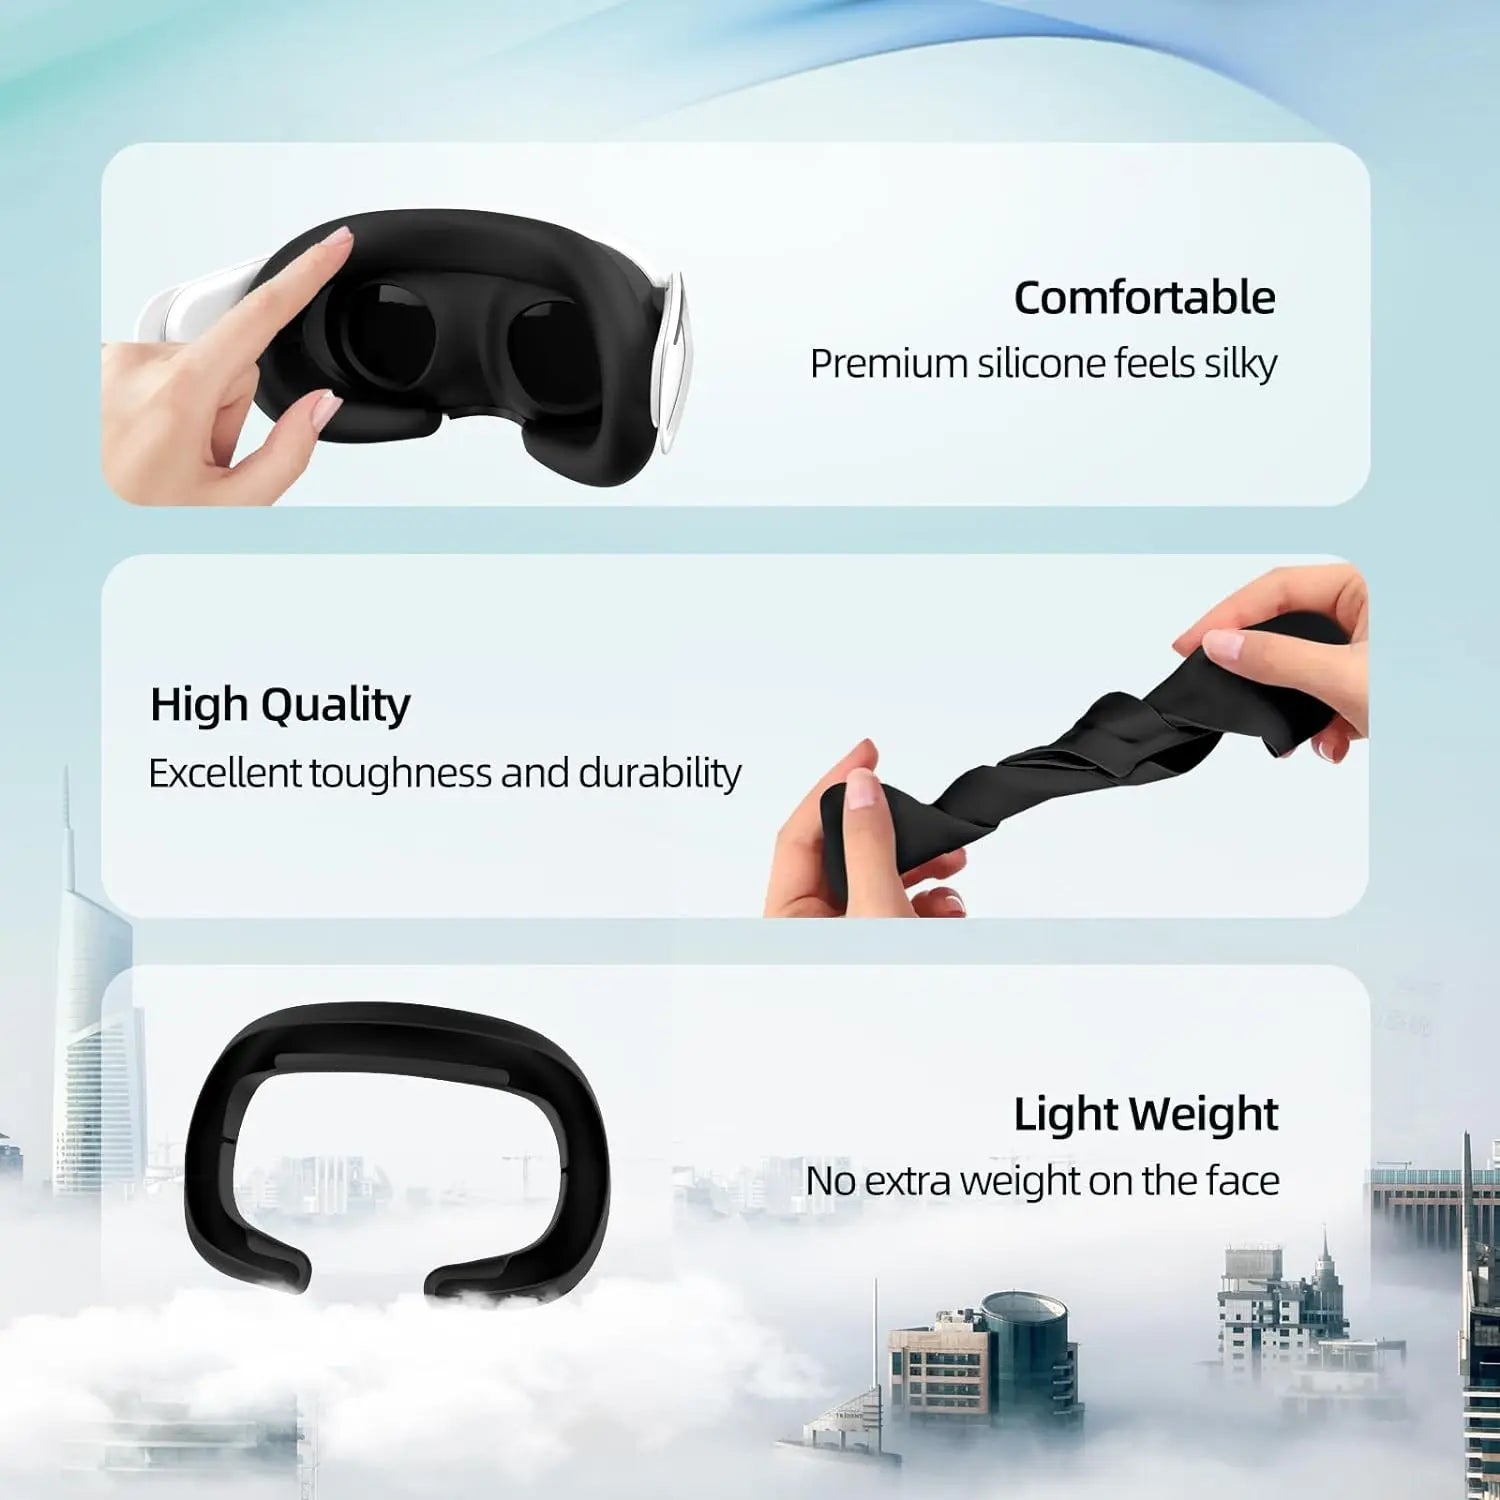 Enhance Your VR Comfort with Meta Quest 3 Facial Interface and